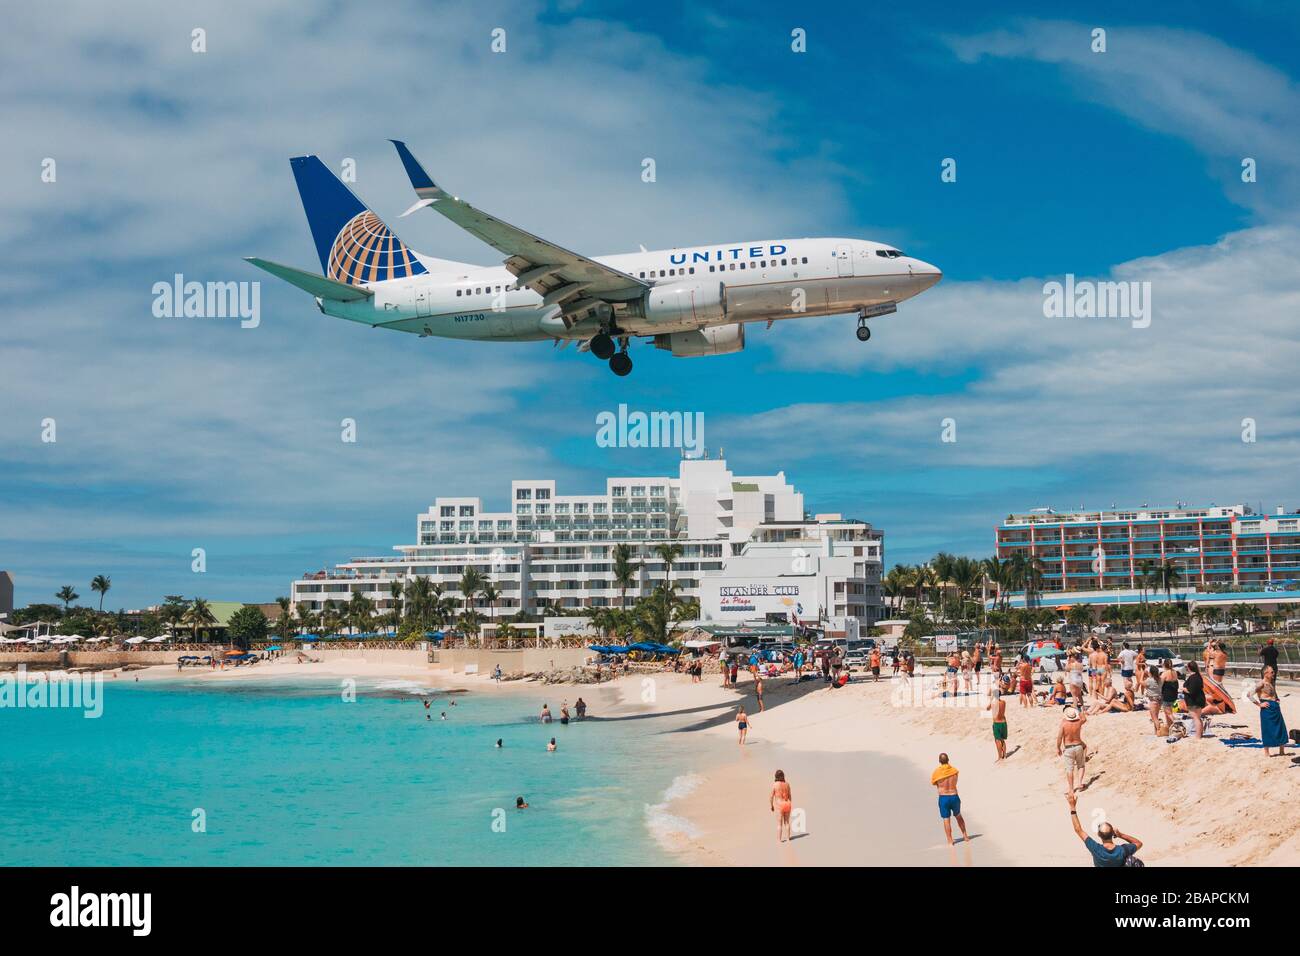 A United Airlines Boeing 737-700 flies over tourists on Maho Beach while landing at St. Maarten Princess Juliana International Airport Stock Photo